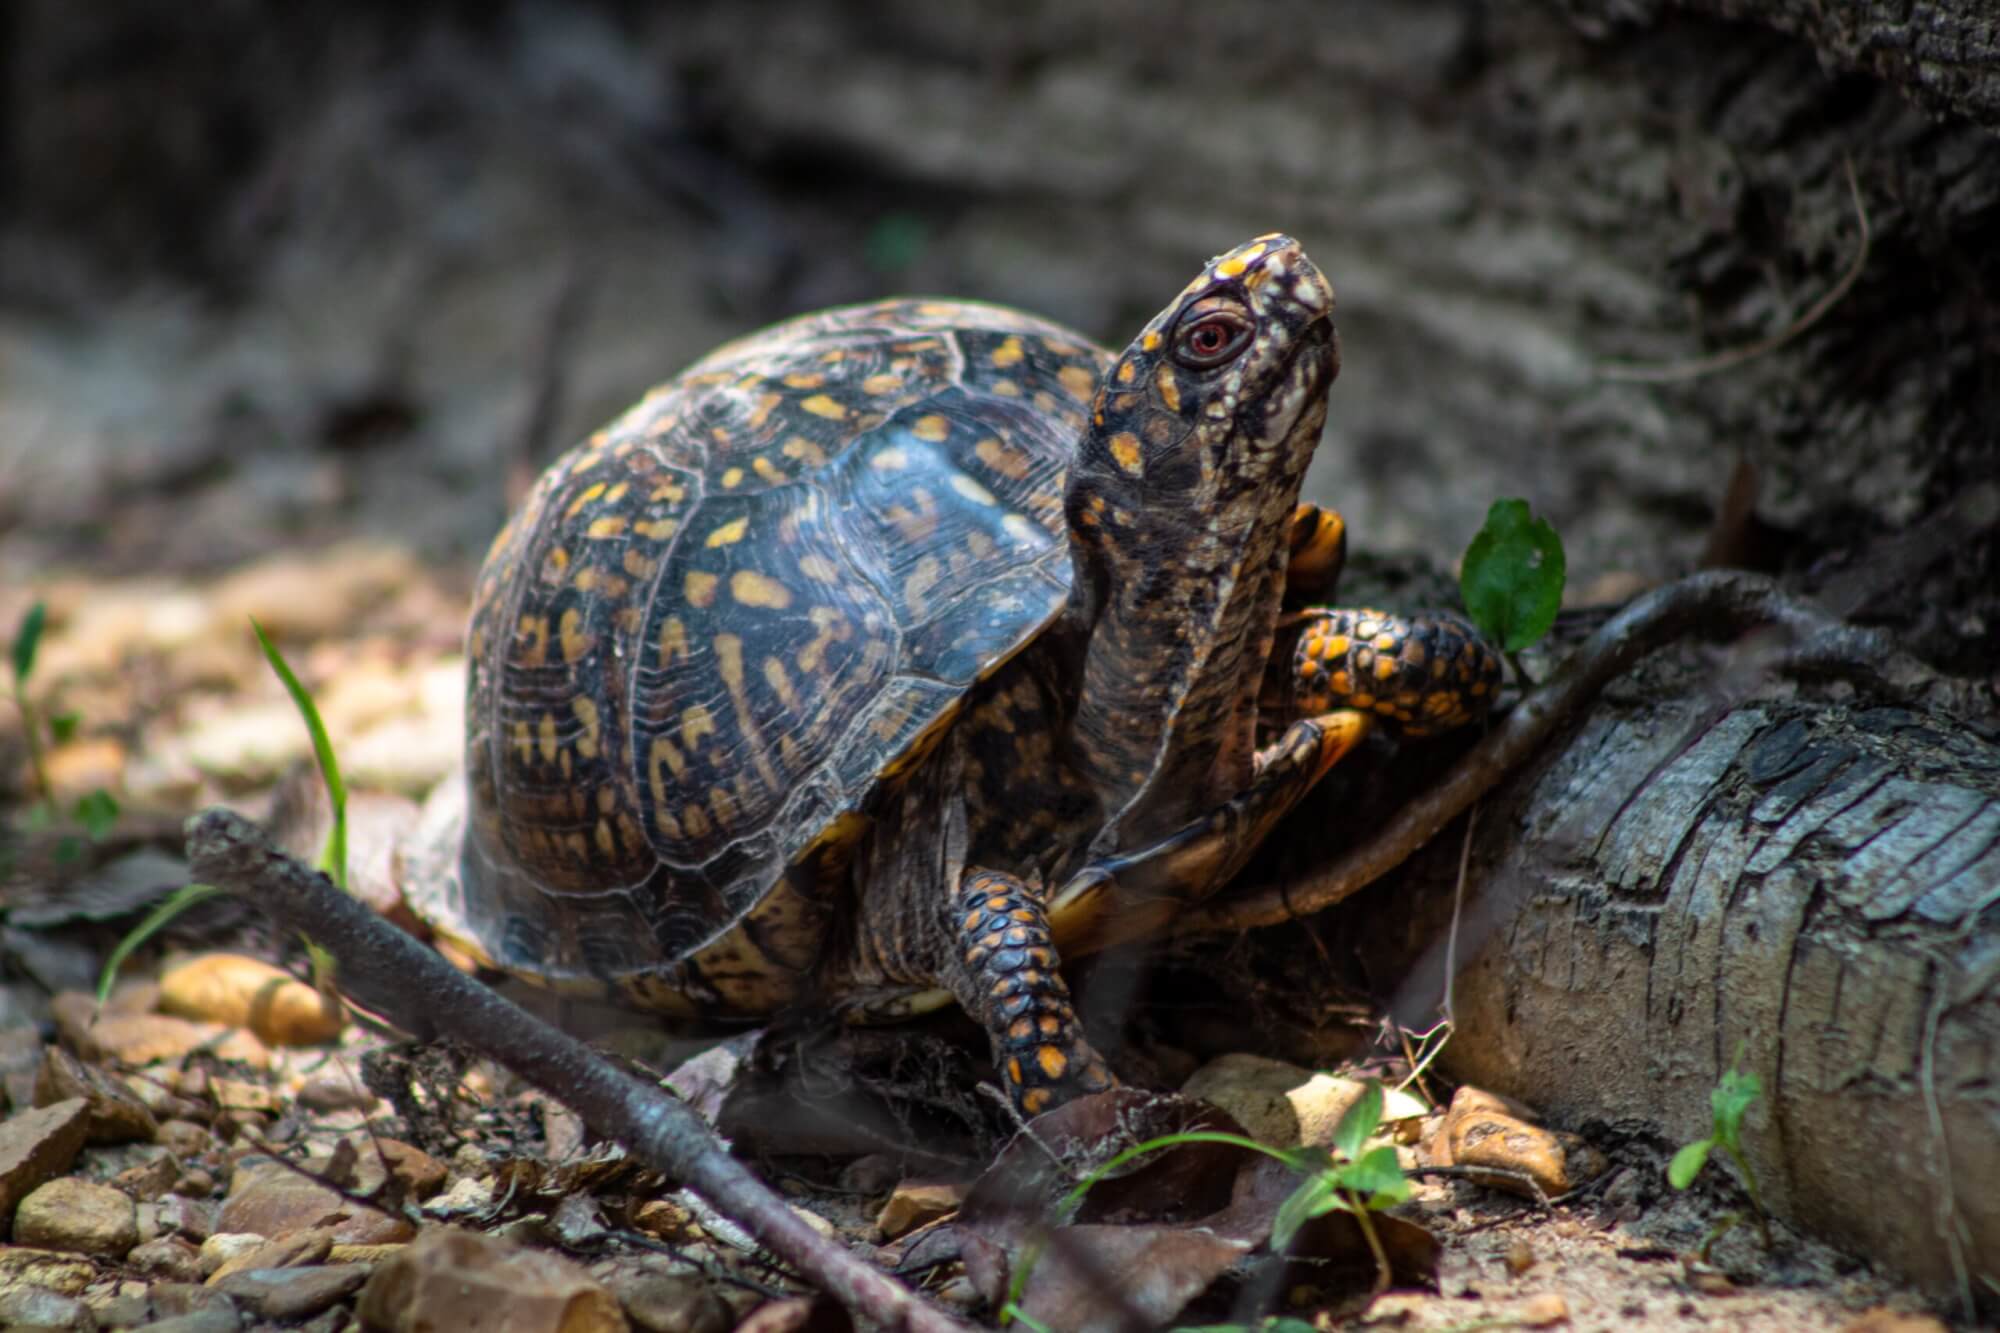 Image from Unsplash of a turtle for the featured image